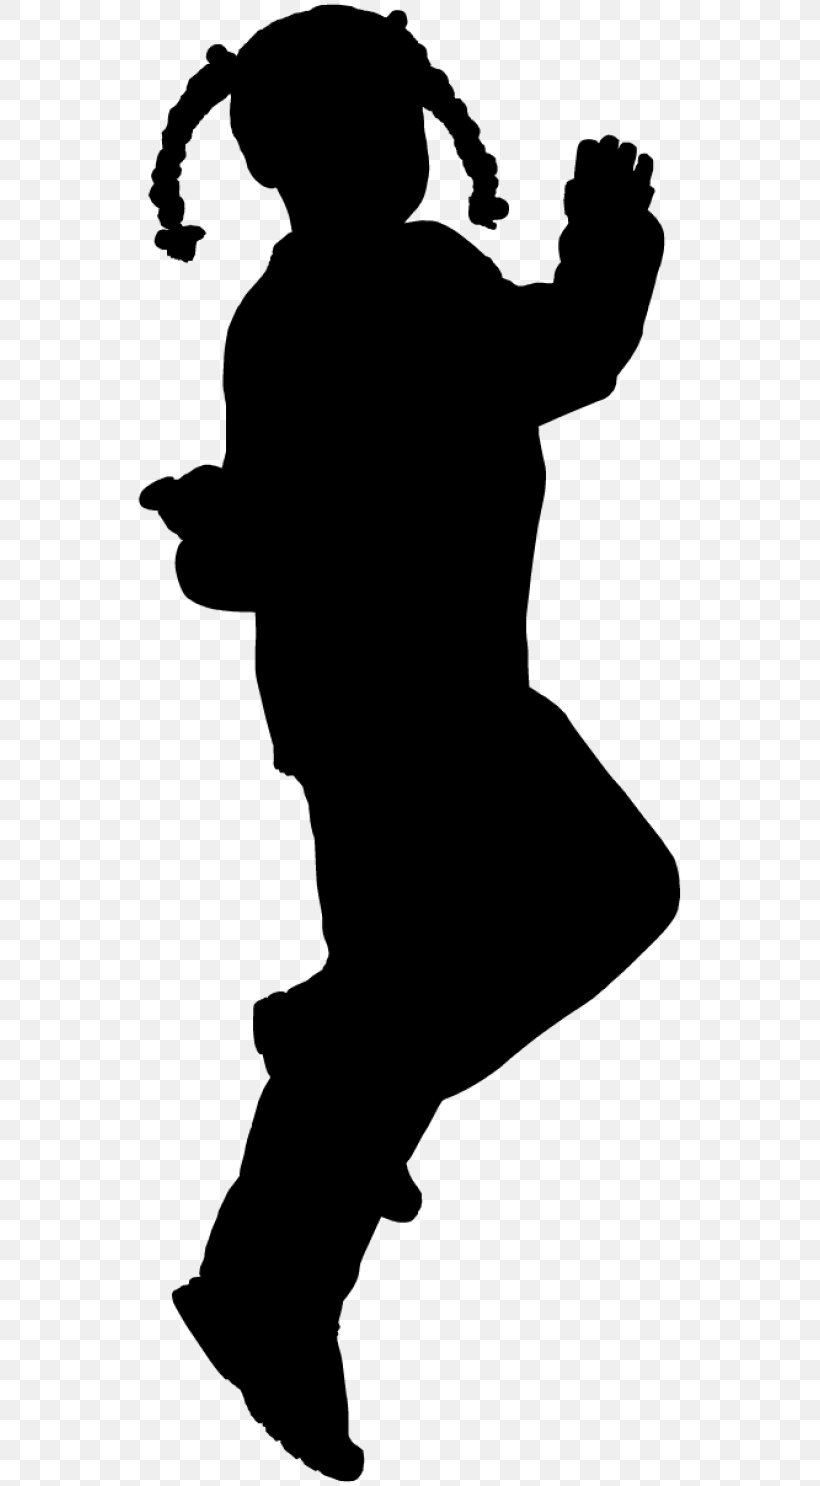 Silhouette Art Clip Art, PNG, 550x1486px, Silhouette, Art, Black, Black And White, Fictional Character Download Free